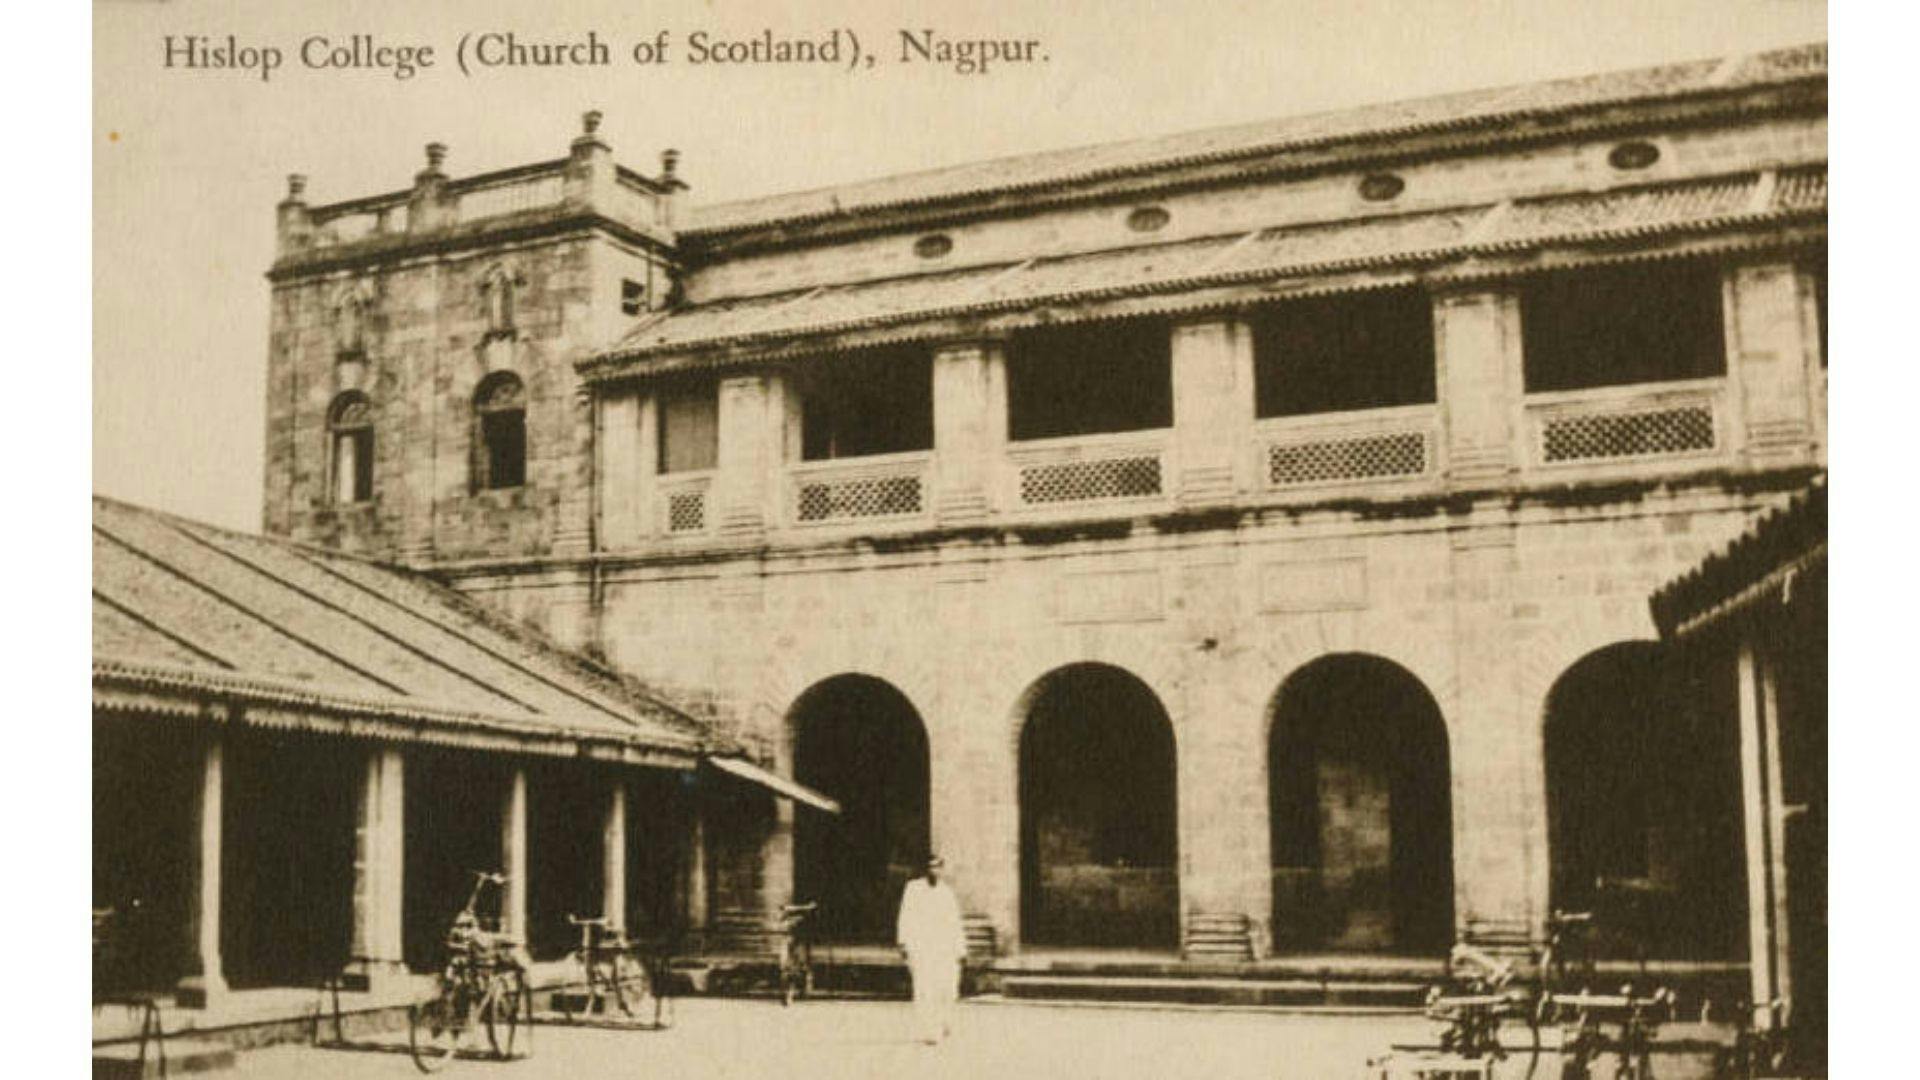 Exterior View of Hislop College, Nagpur in 1927